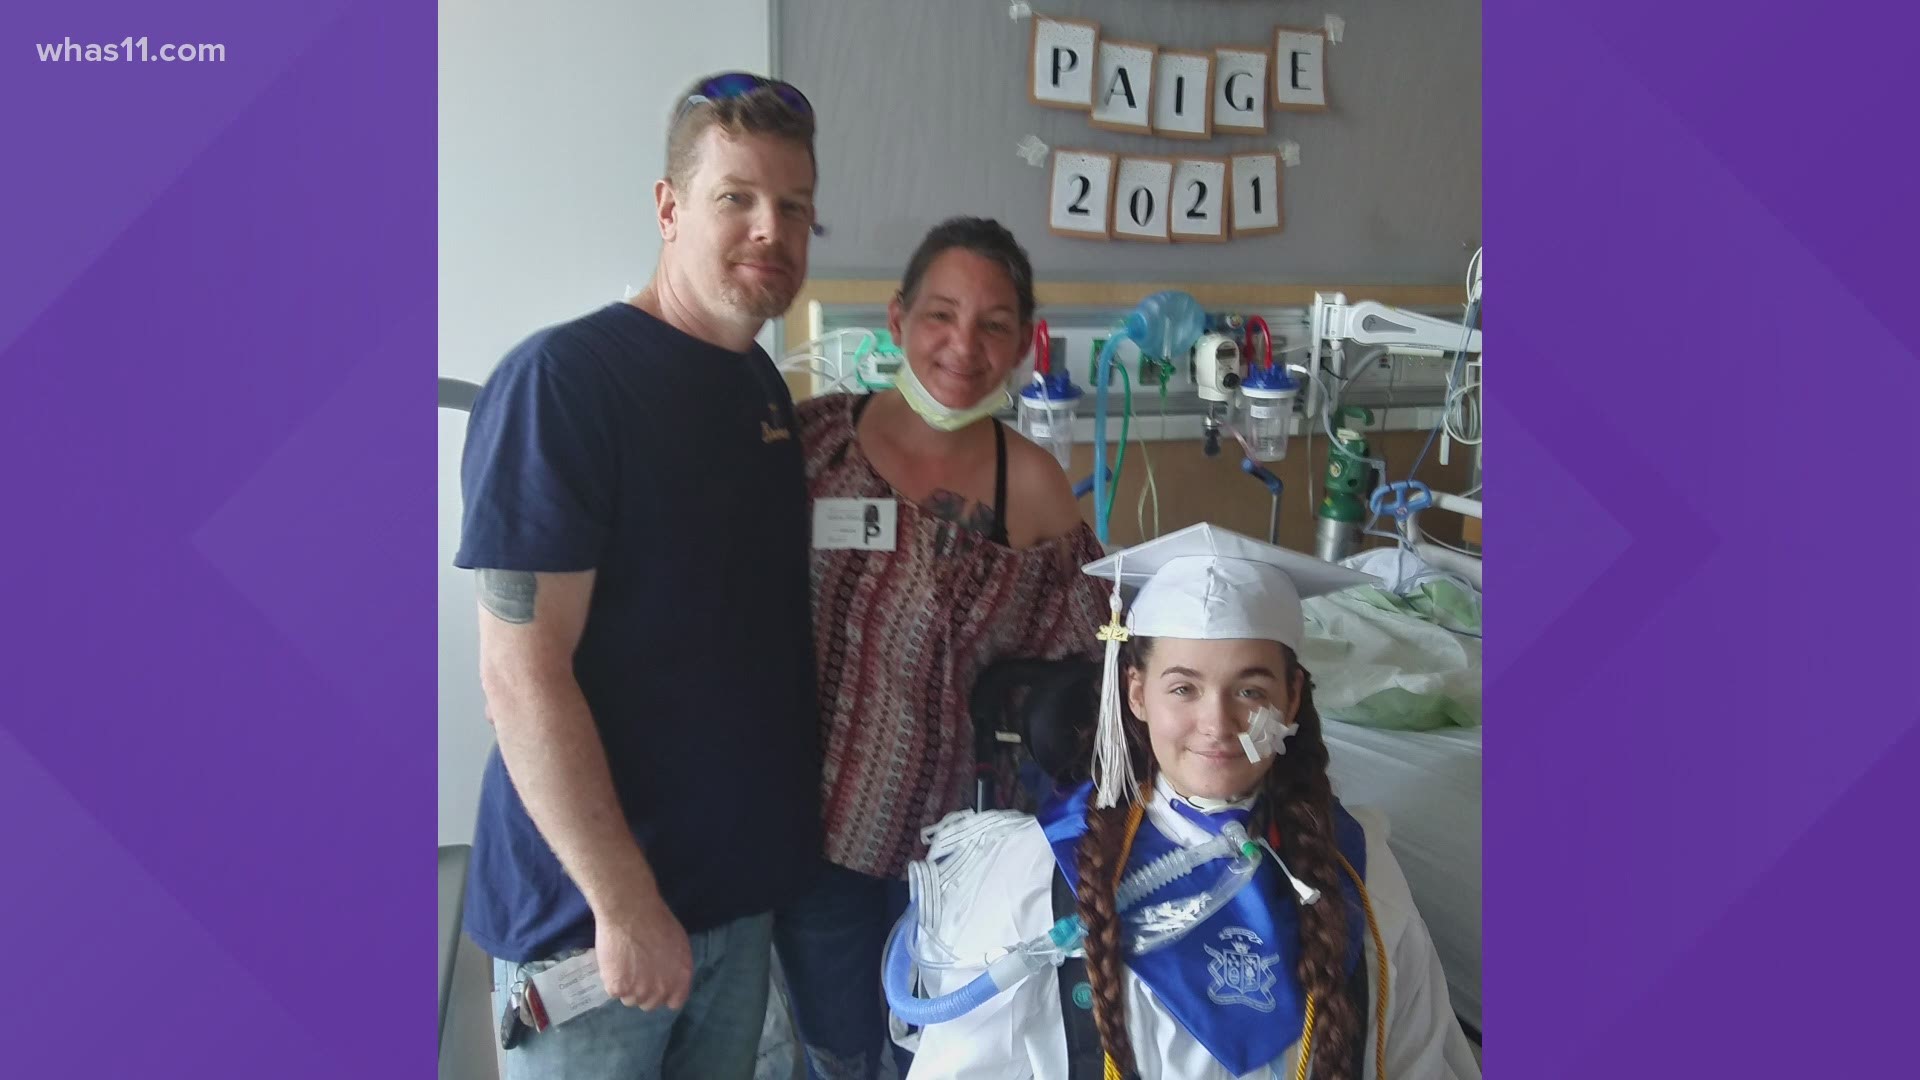 Paige Enyhart and her family are now hoping the community can help them make necessary changes to her home so it's ready when she leaves the hospital in July.